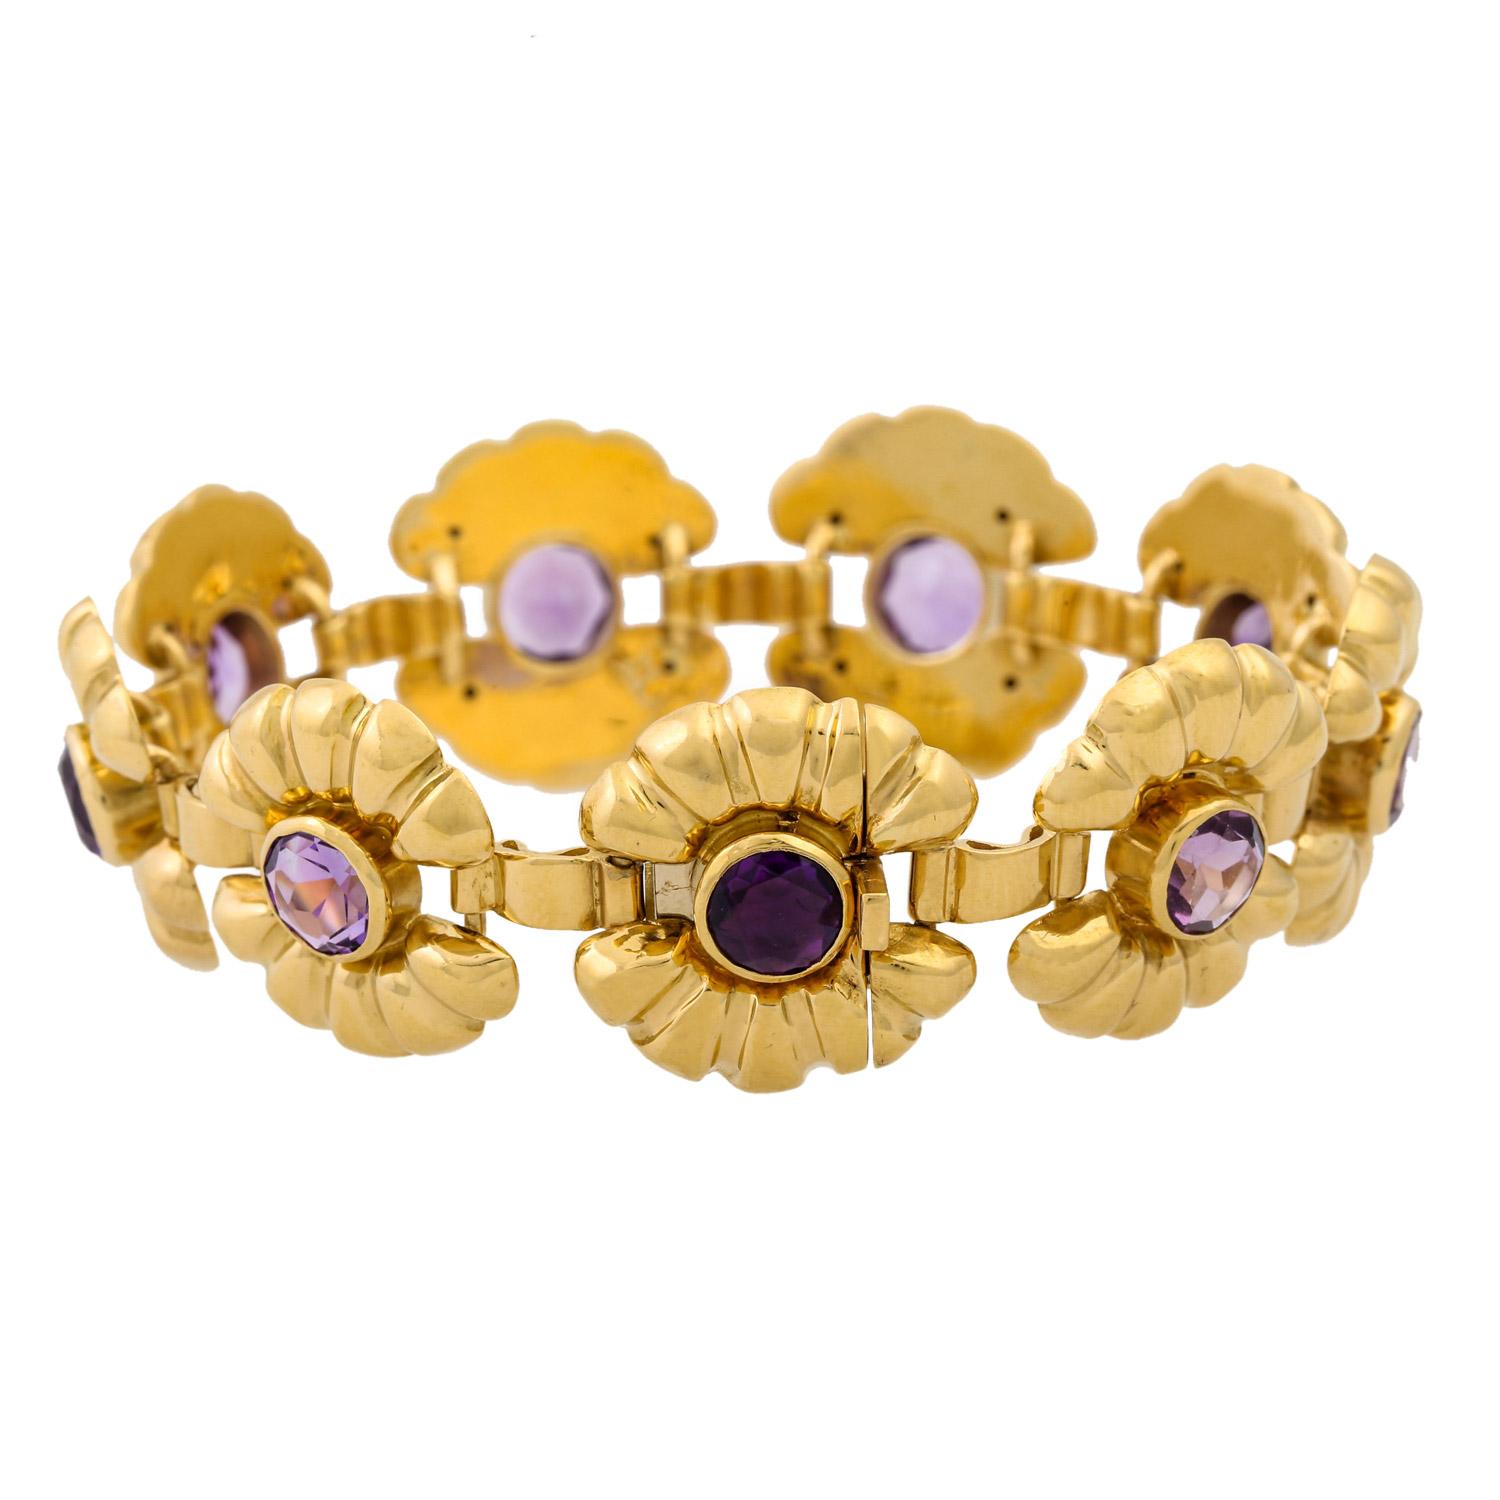 Stone settings in the shape of a flower, GG 18K. 40 g, L: 18.5 cm, mid 20th century, slight signs of wear, handmade!

 Bracelet with 9 amethysts, stone settings in the shape of a flower, 18K YG, 40 g, L: 18.5 cm, mid 20th century, minor signs of